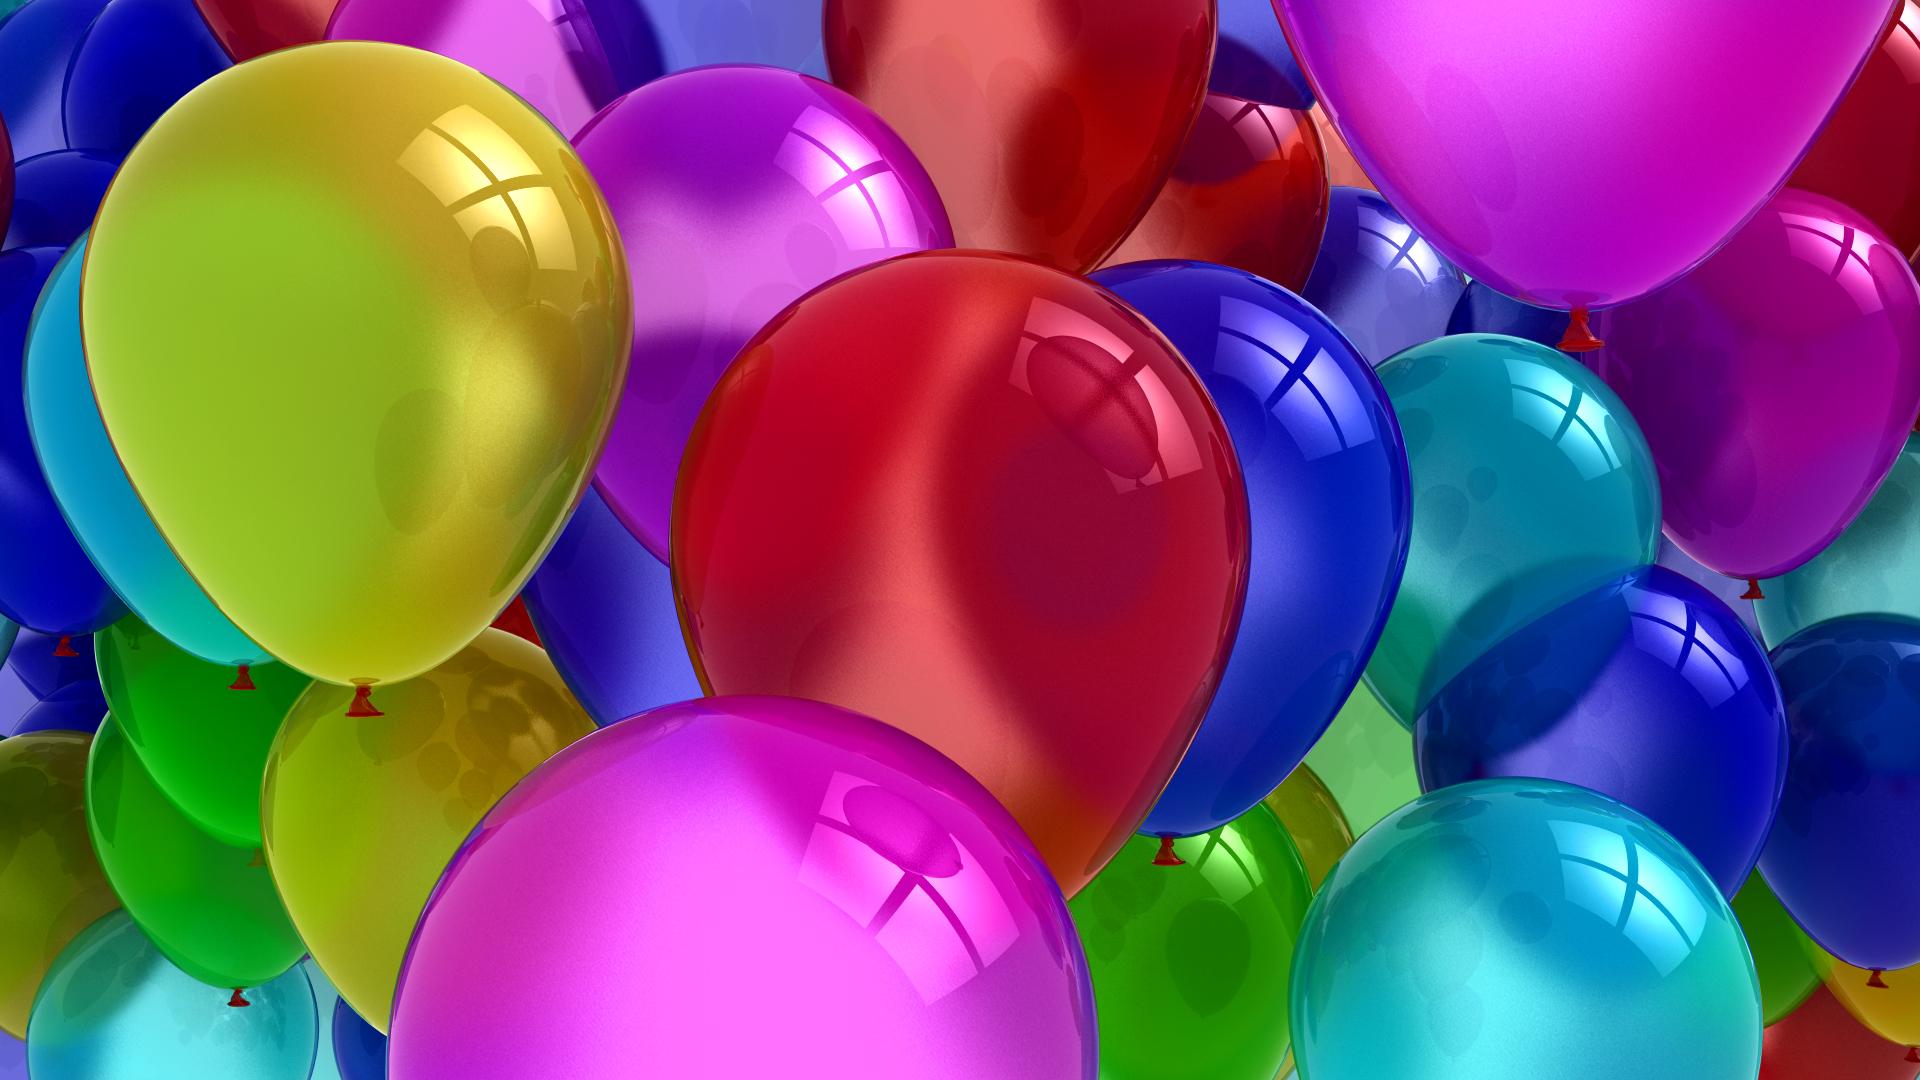 Details 55+ balloon background wallpaper latest - in.cdgdbentre